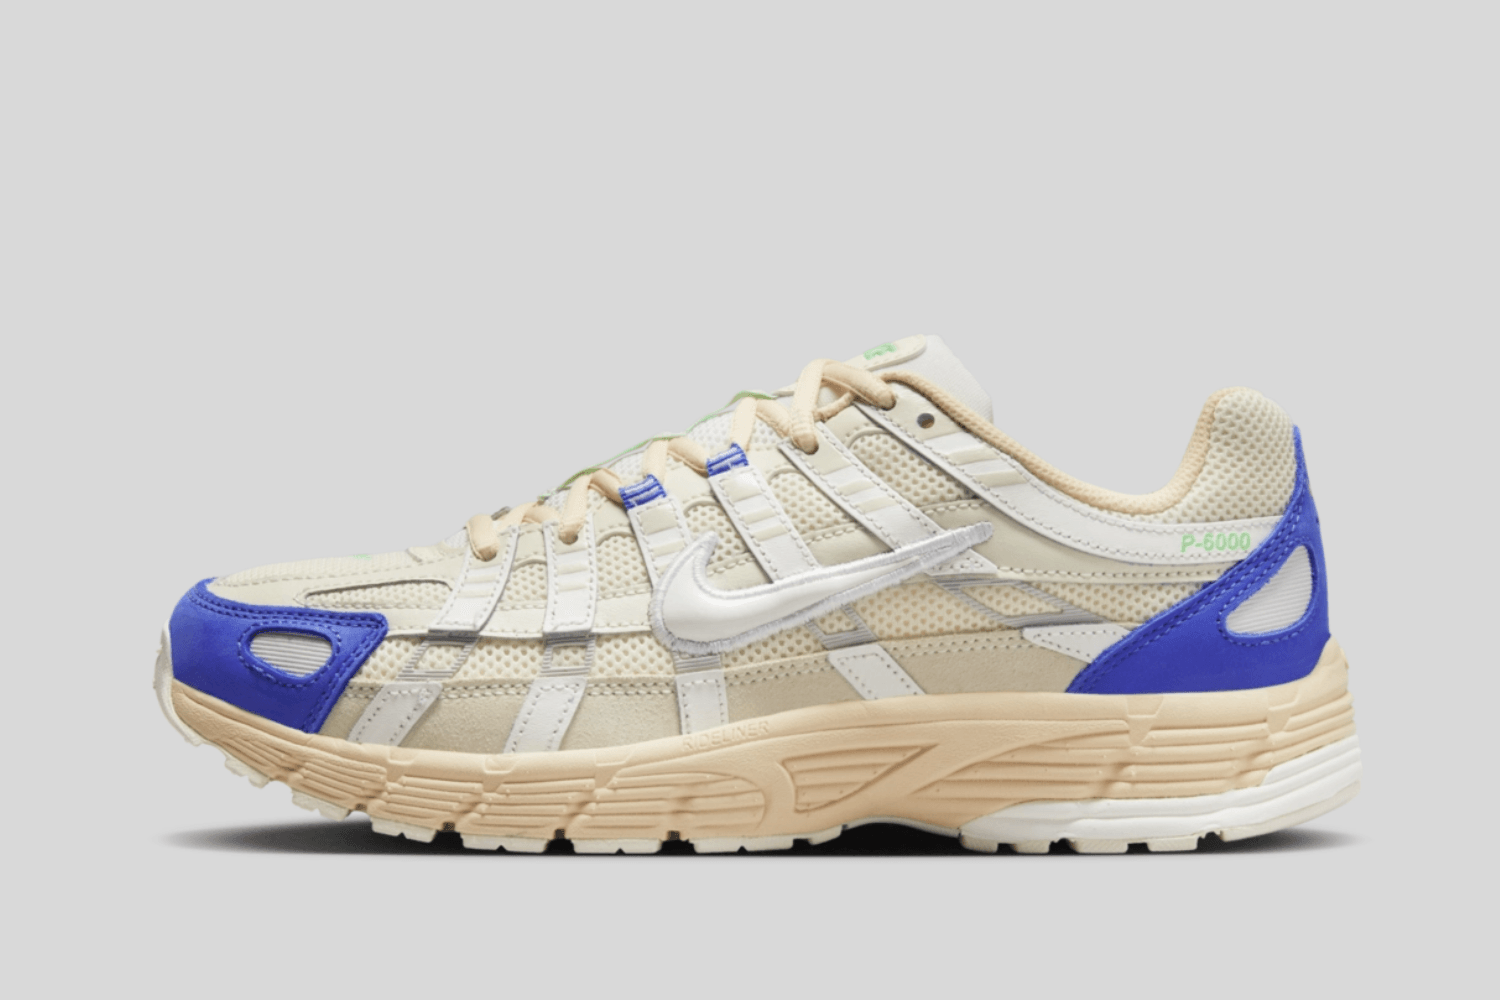 The Nike P-6000 is officially part of the 'Athletic Department' collection